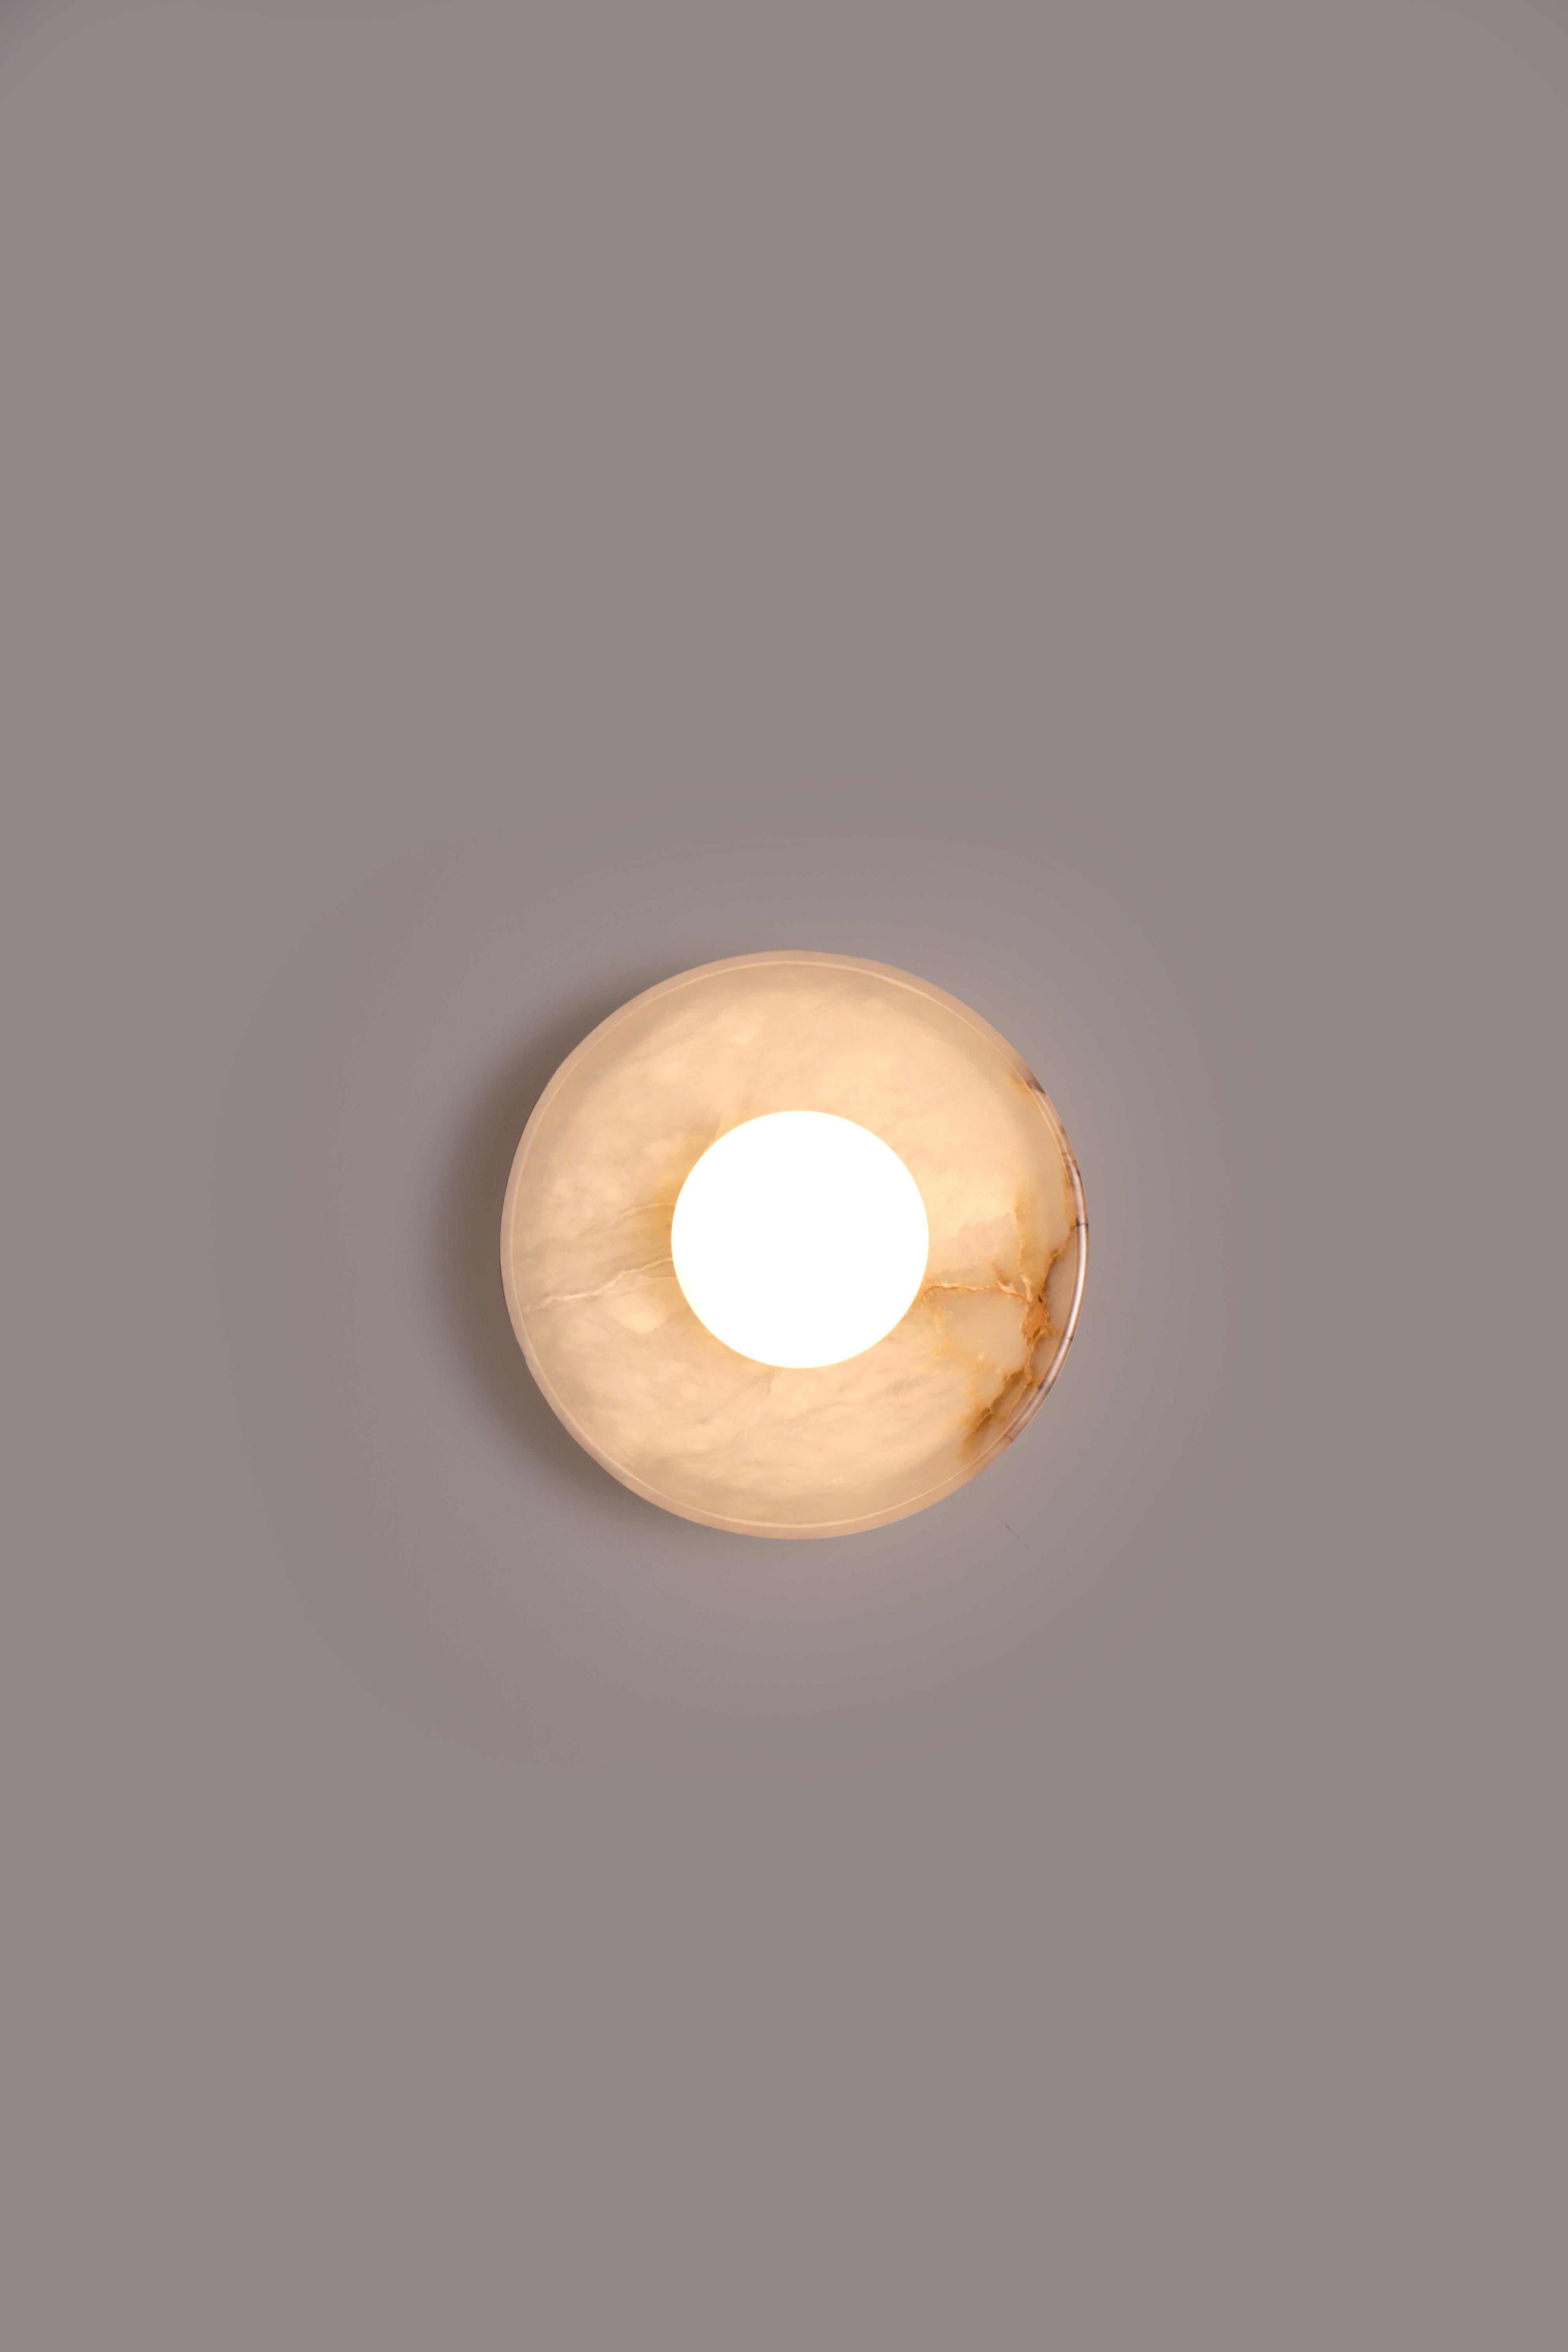 Indian Blot Marble Dome Wall Sconce by Lamp Shaper For Sale